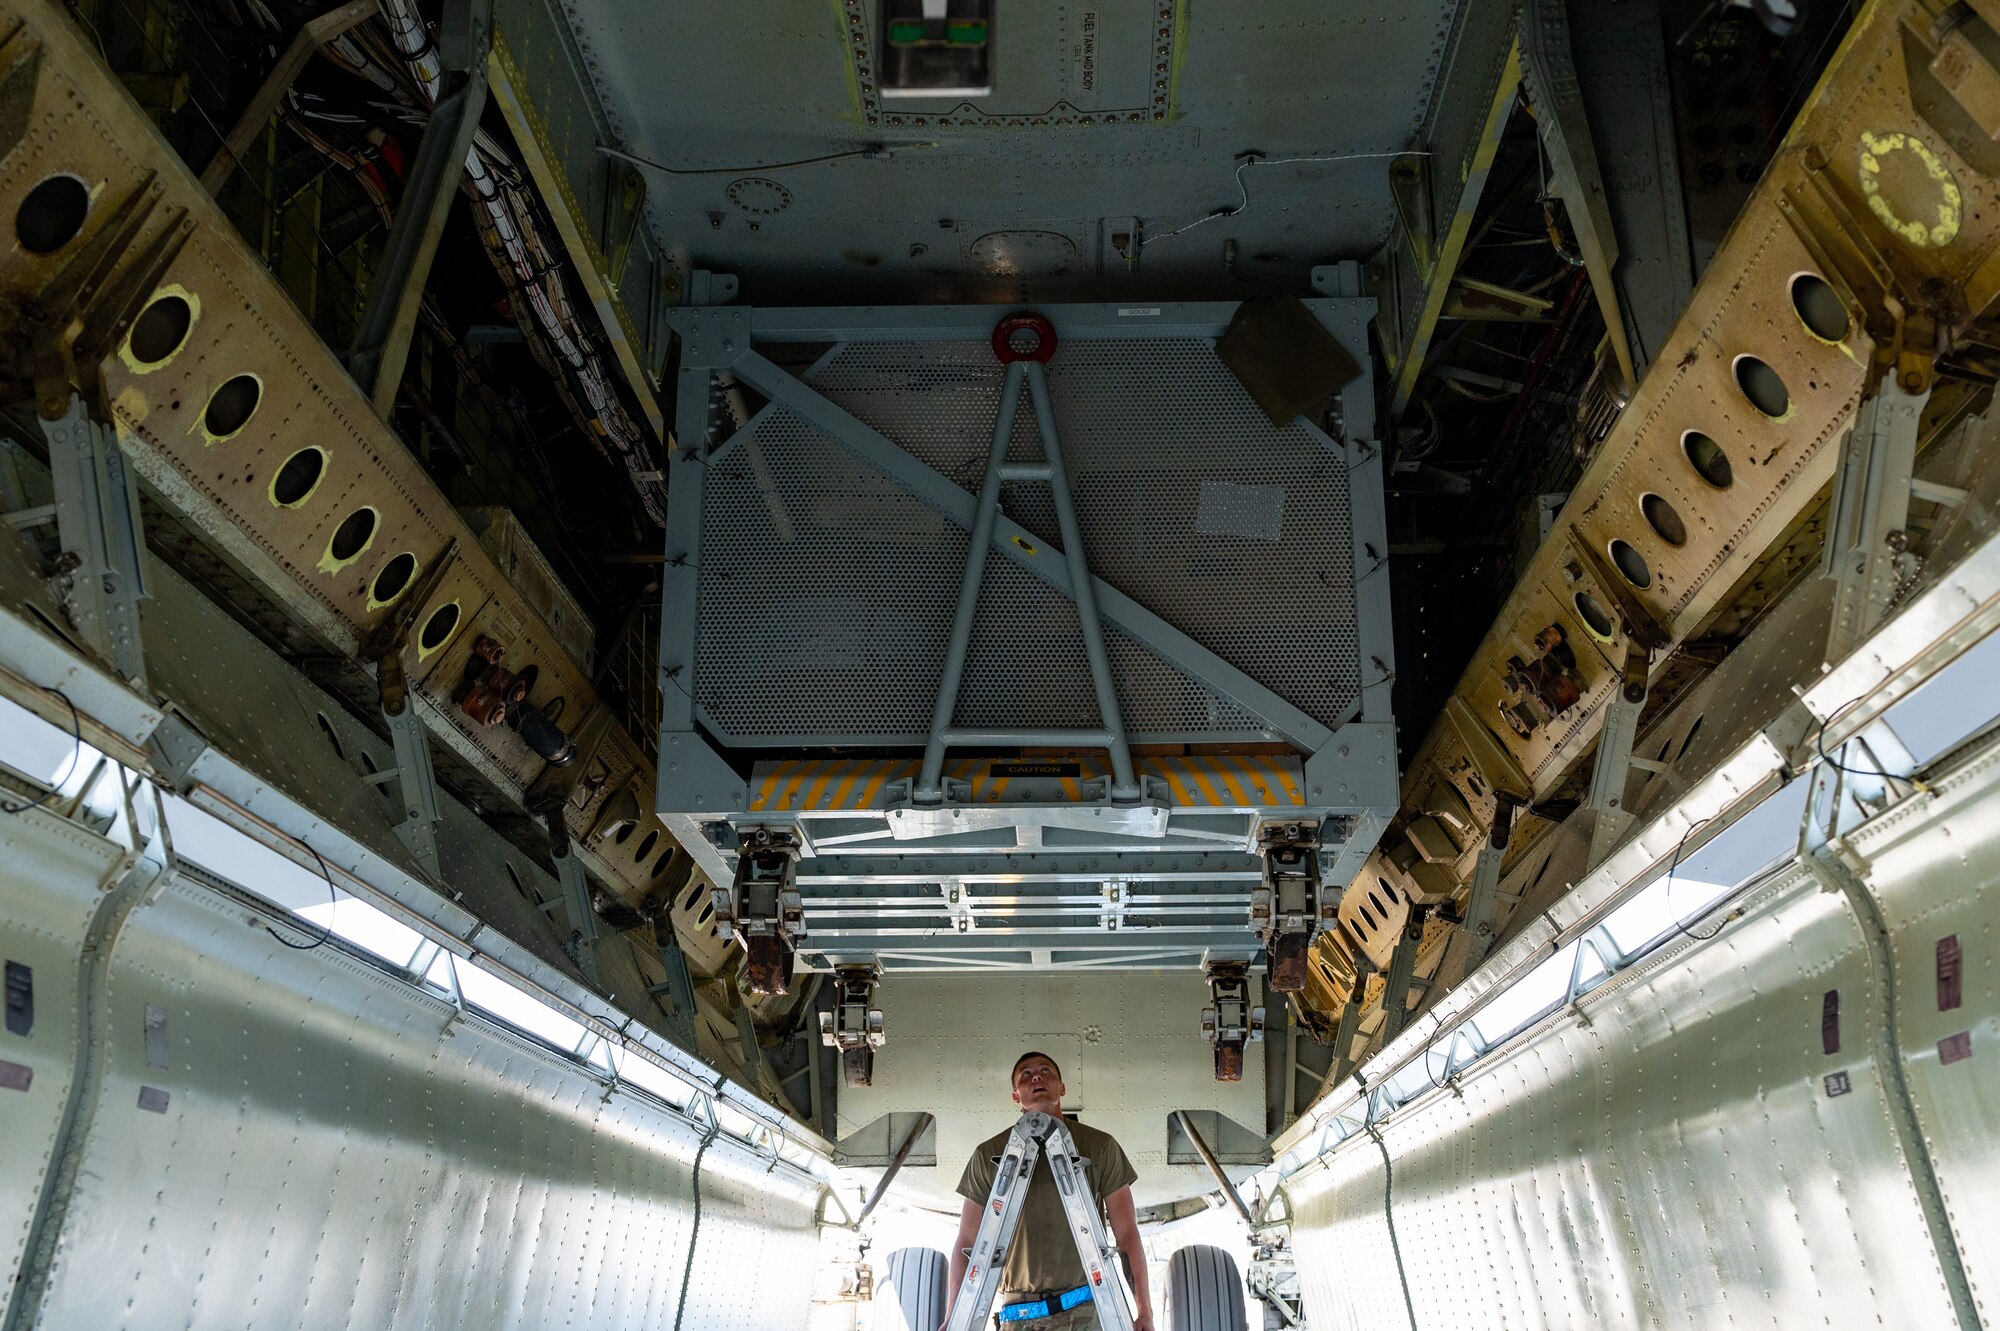 Senior Airman Aaron Wiles, 2nd Aircraft Maintenance Squadron engine mechanic, prepares to inspect a B-52 On-board Cargo System, known as BOCS, after landing at Fairchild Air Force Base, Washington, Aug. 18, 2022. The BOCS is a cargo container that connects to the operational bomb bays inside the aircraft and is capable of holding up to 5,000 pounds of maintenance and support equipment. (U.S. Air Force photo by Senior Airman Chase Sullivan)